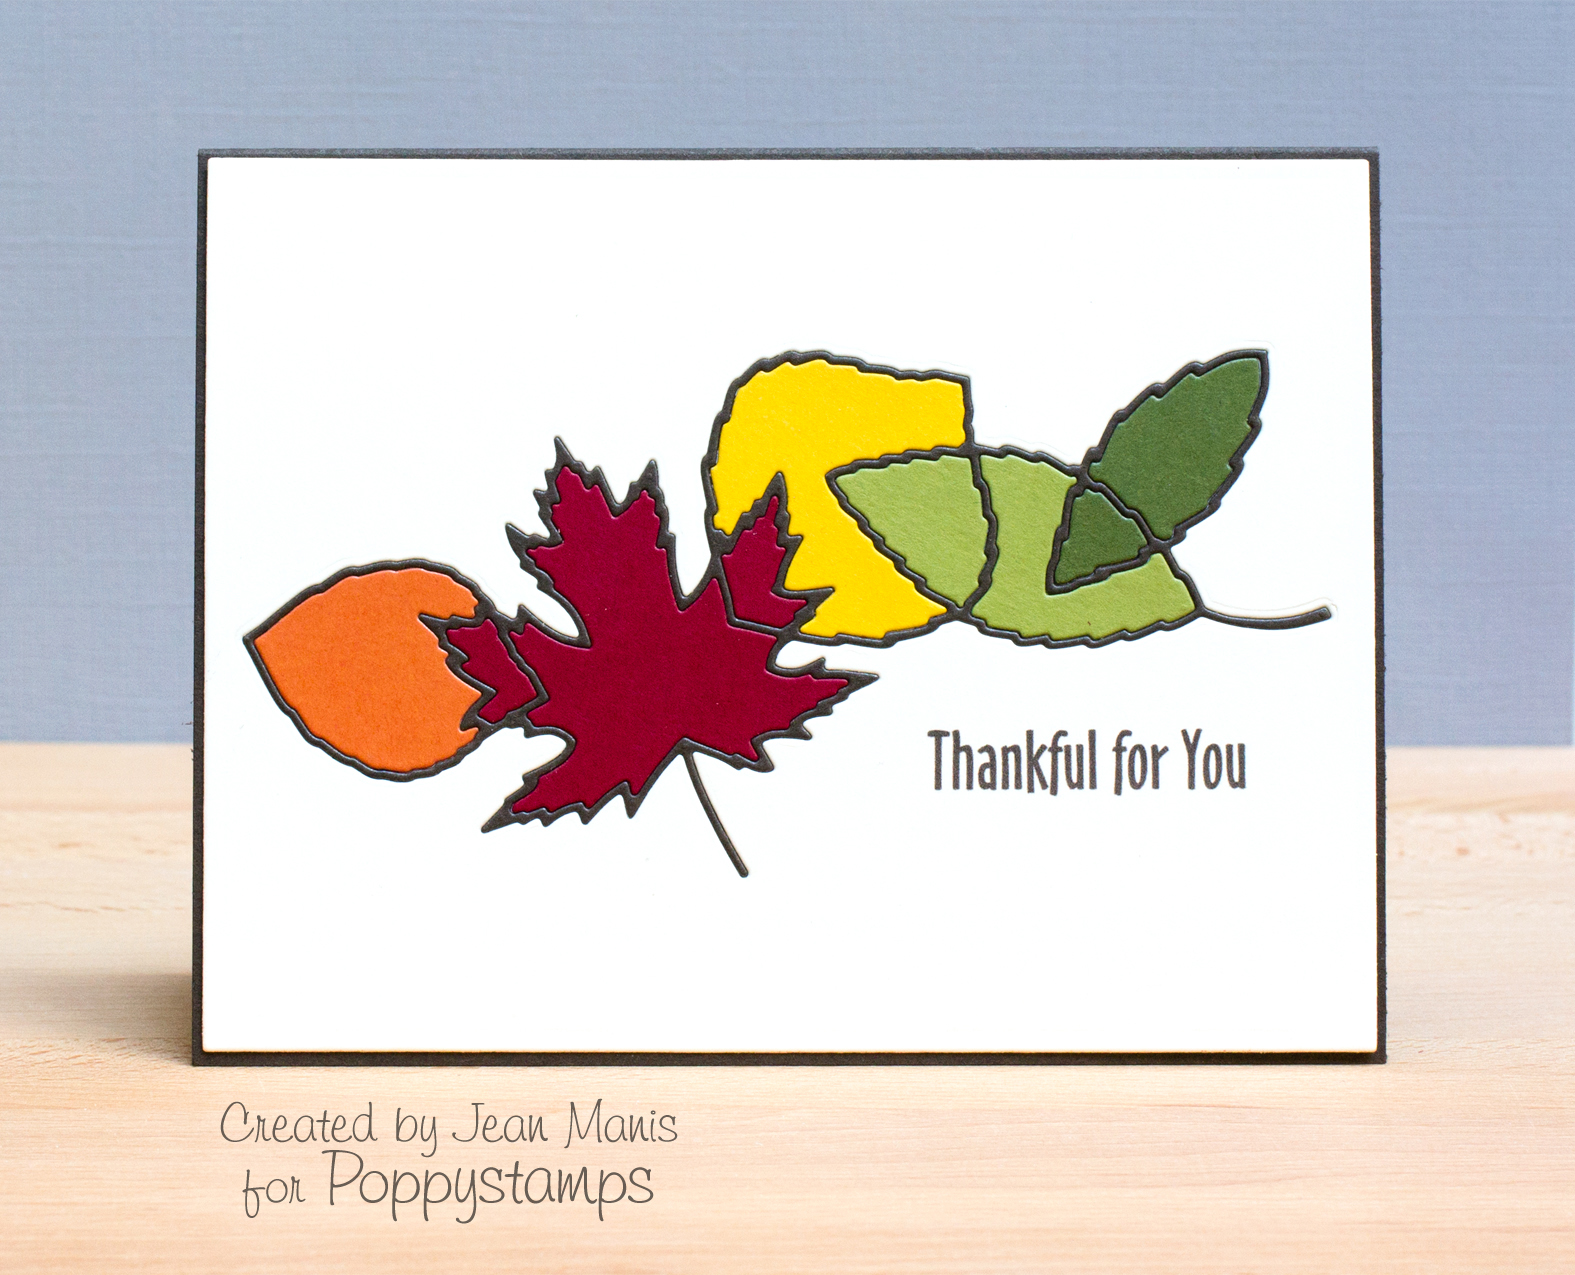 Poppystamps Holiday Release: Thankful for You